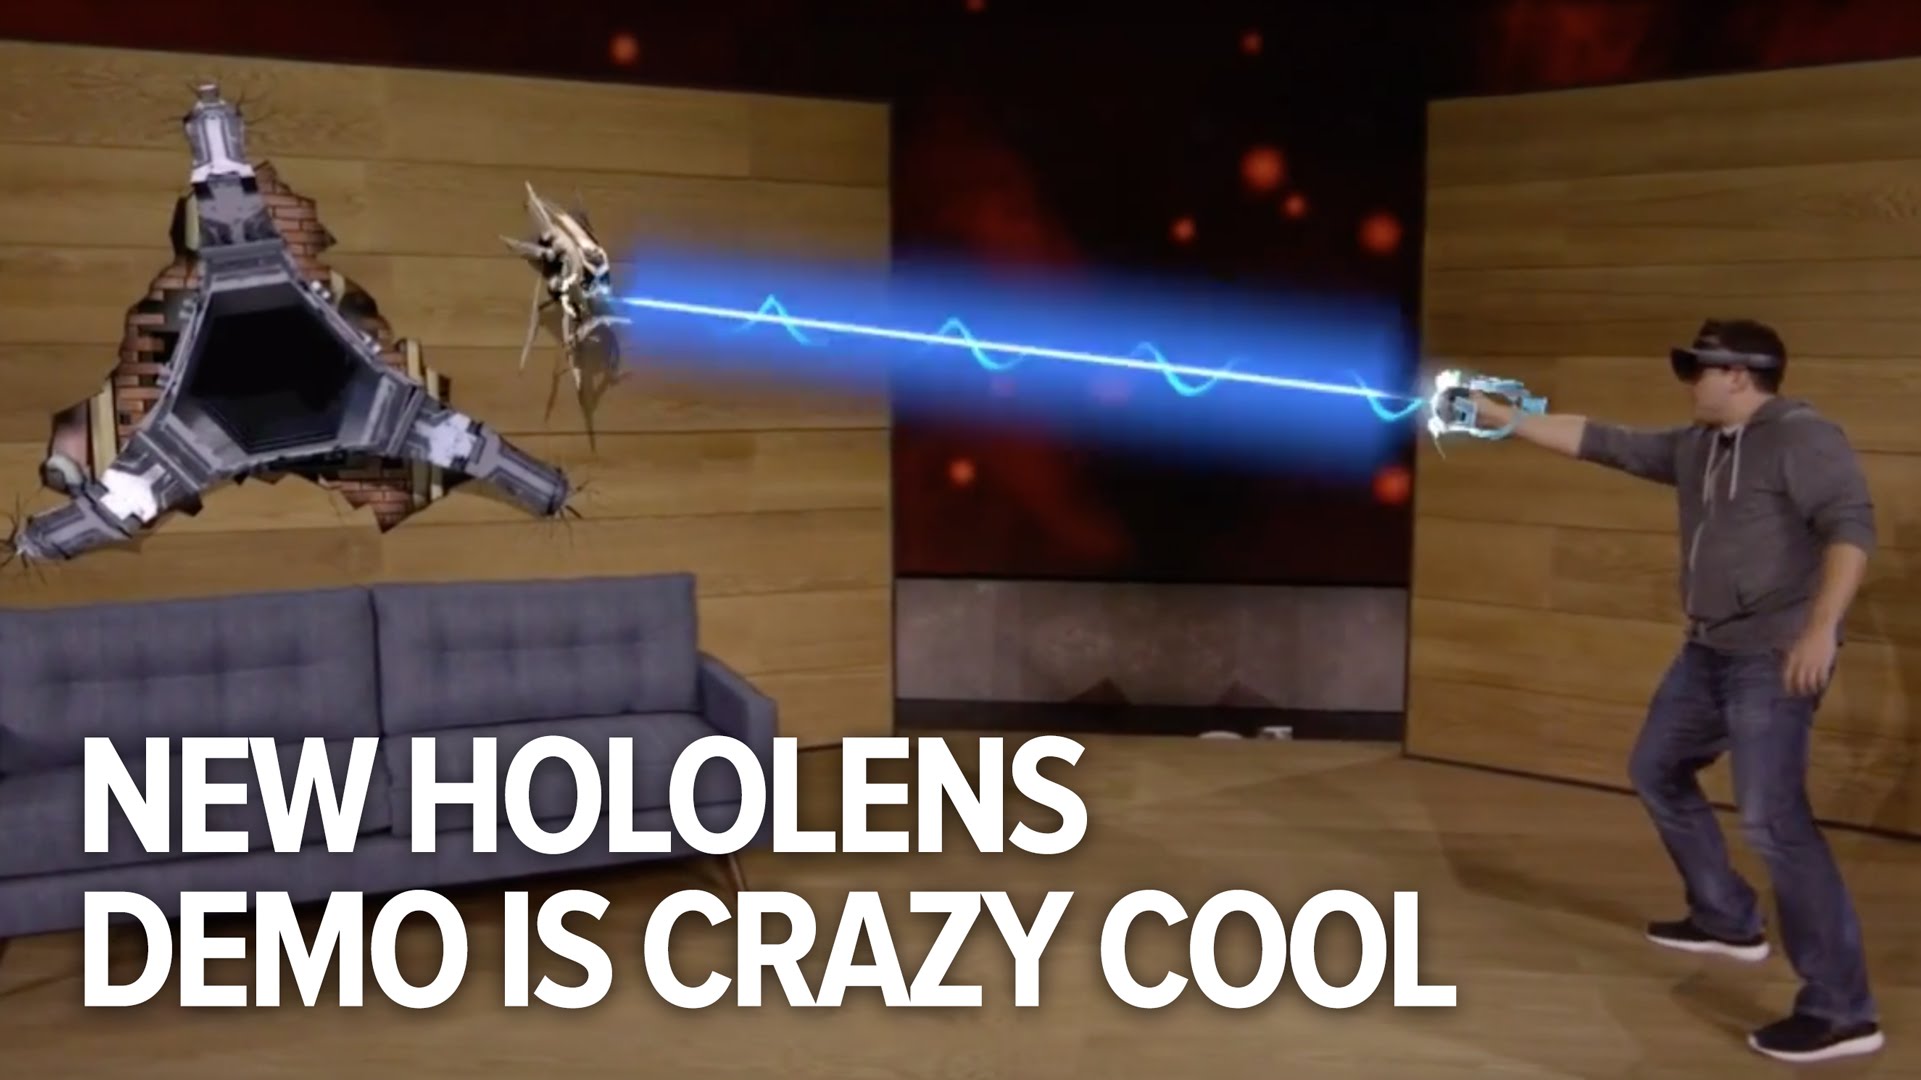 hololens MS demo pic